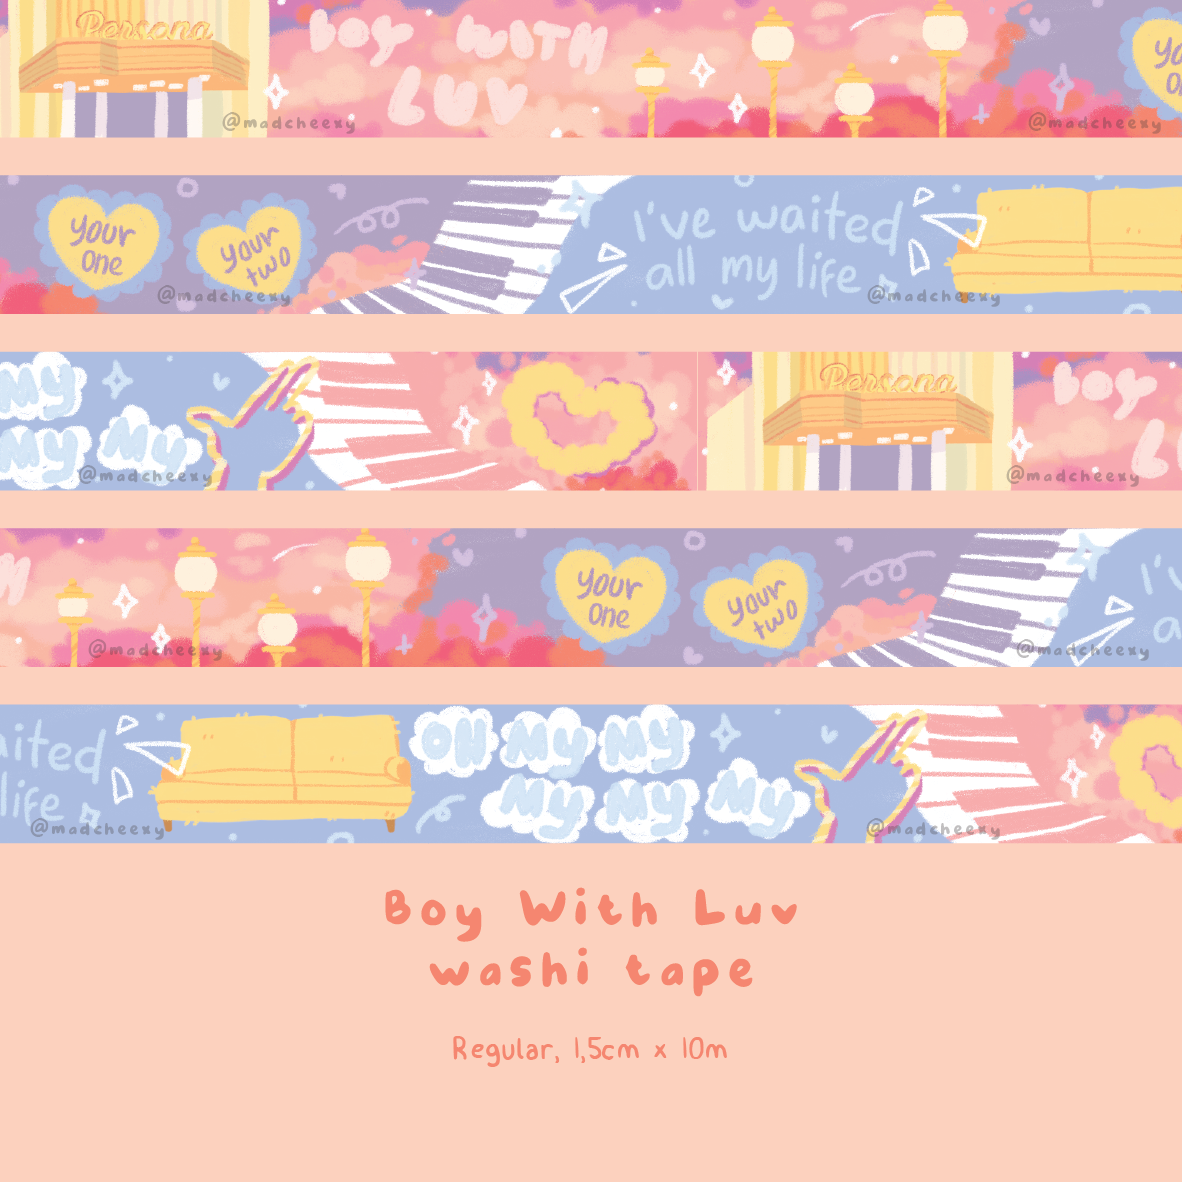 Boy With Luv Washi Tape